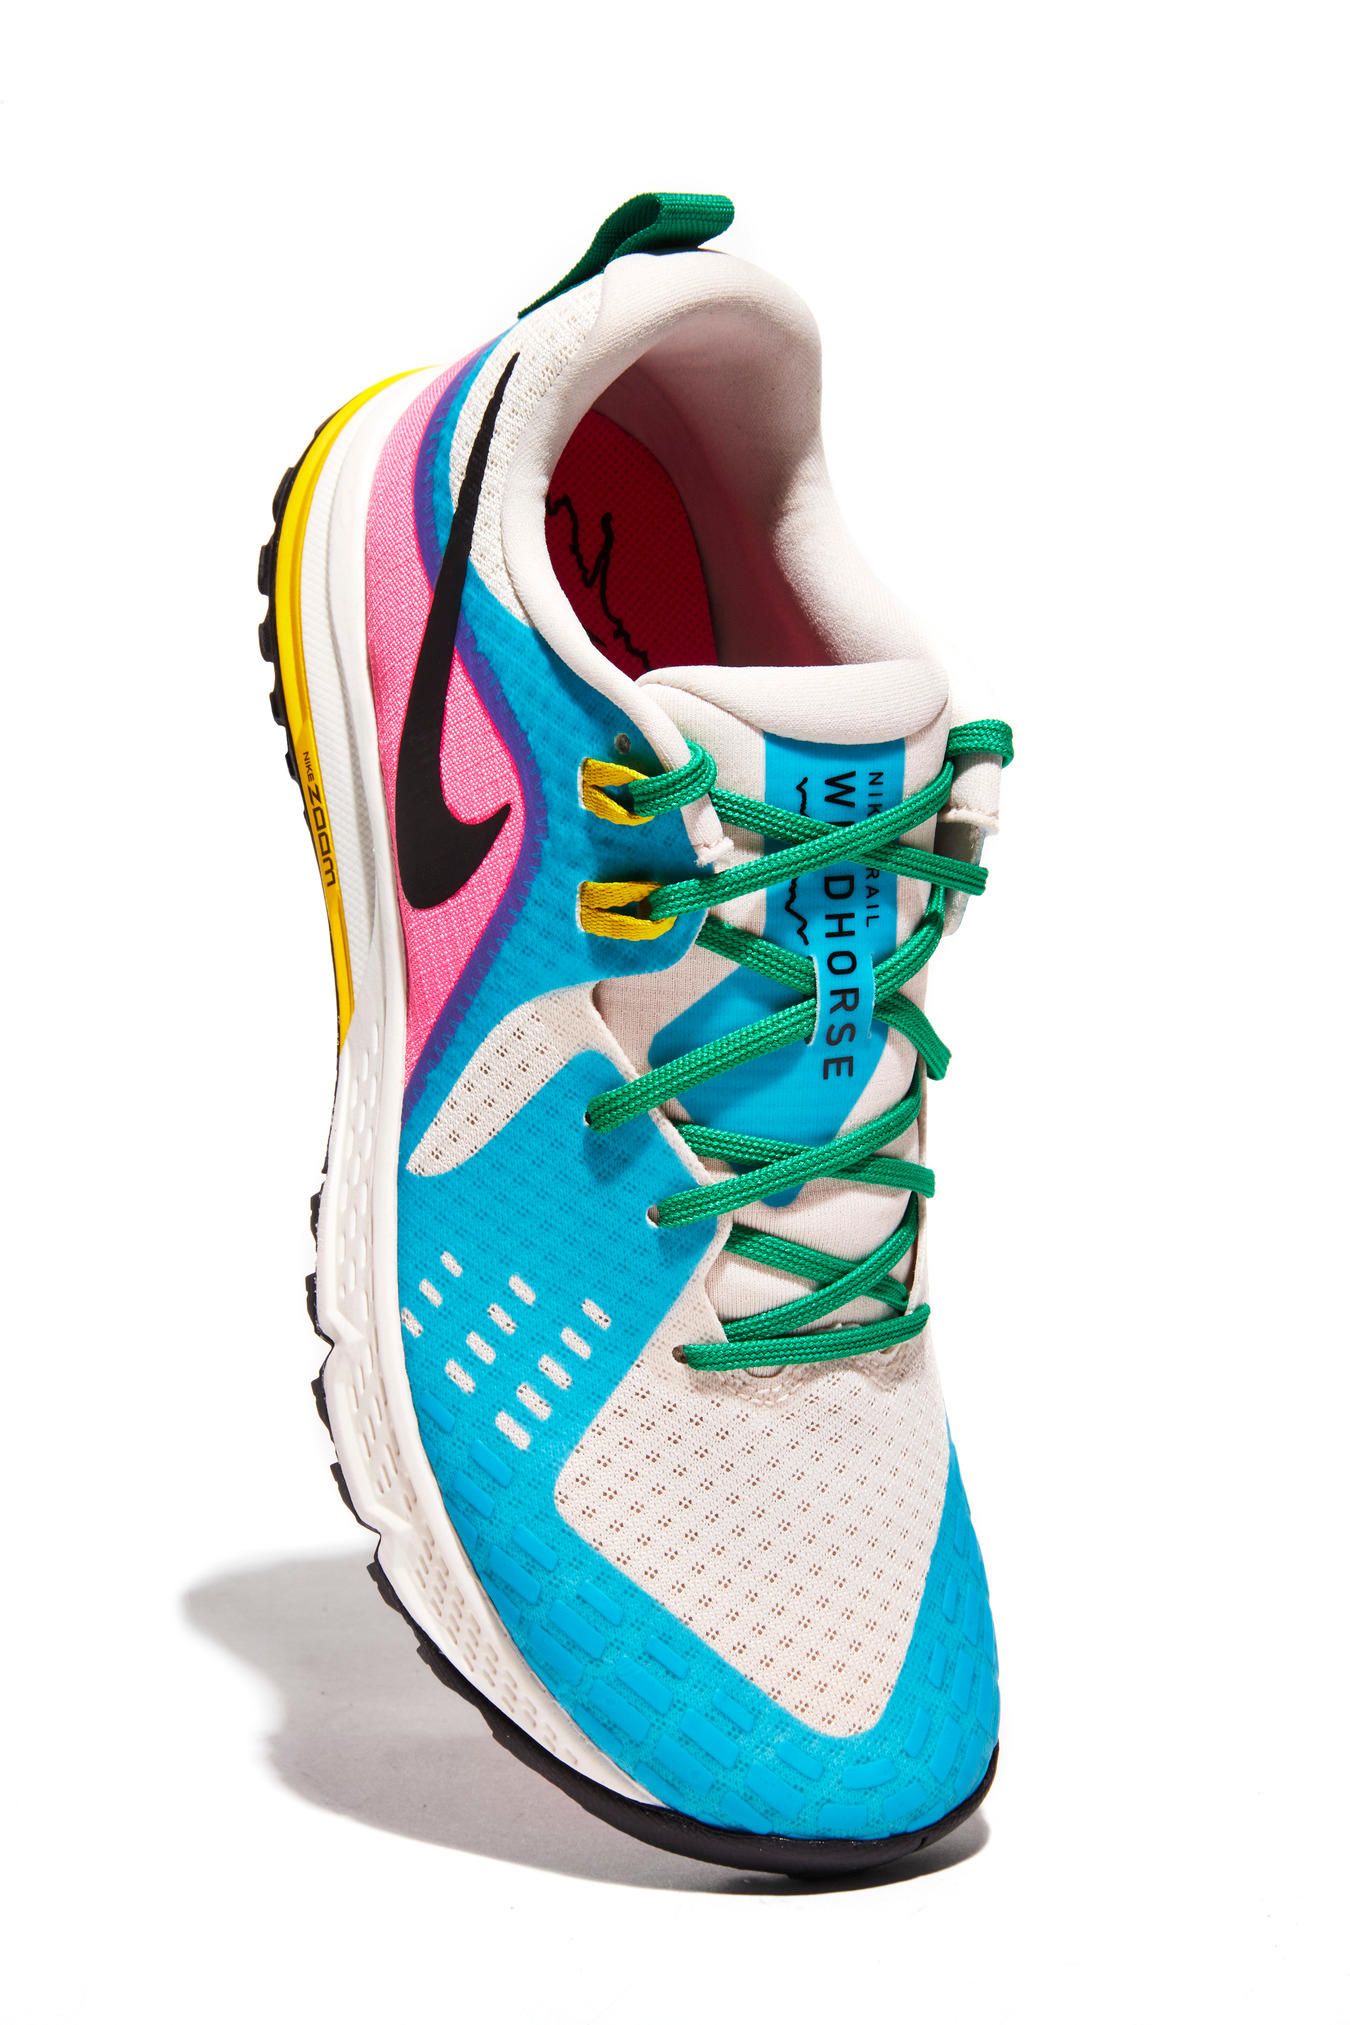 Footwear, Aqua, Shoe, Turquoise, Teal, Product, Azure, Sneakers, Turquoise, Athletic shoe, 